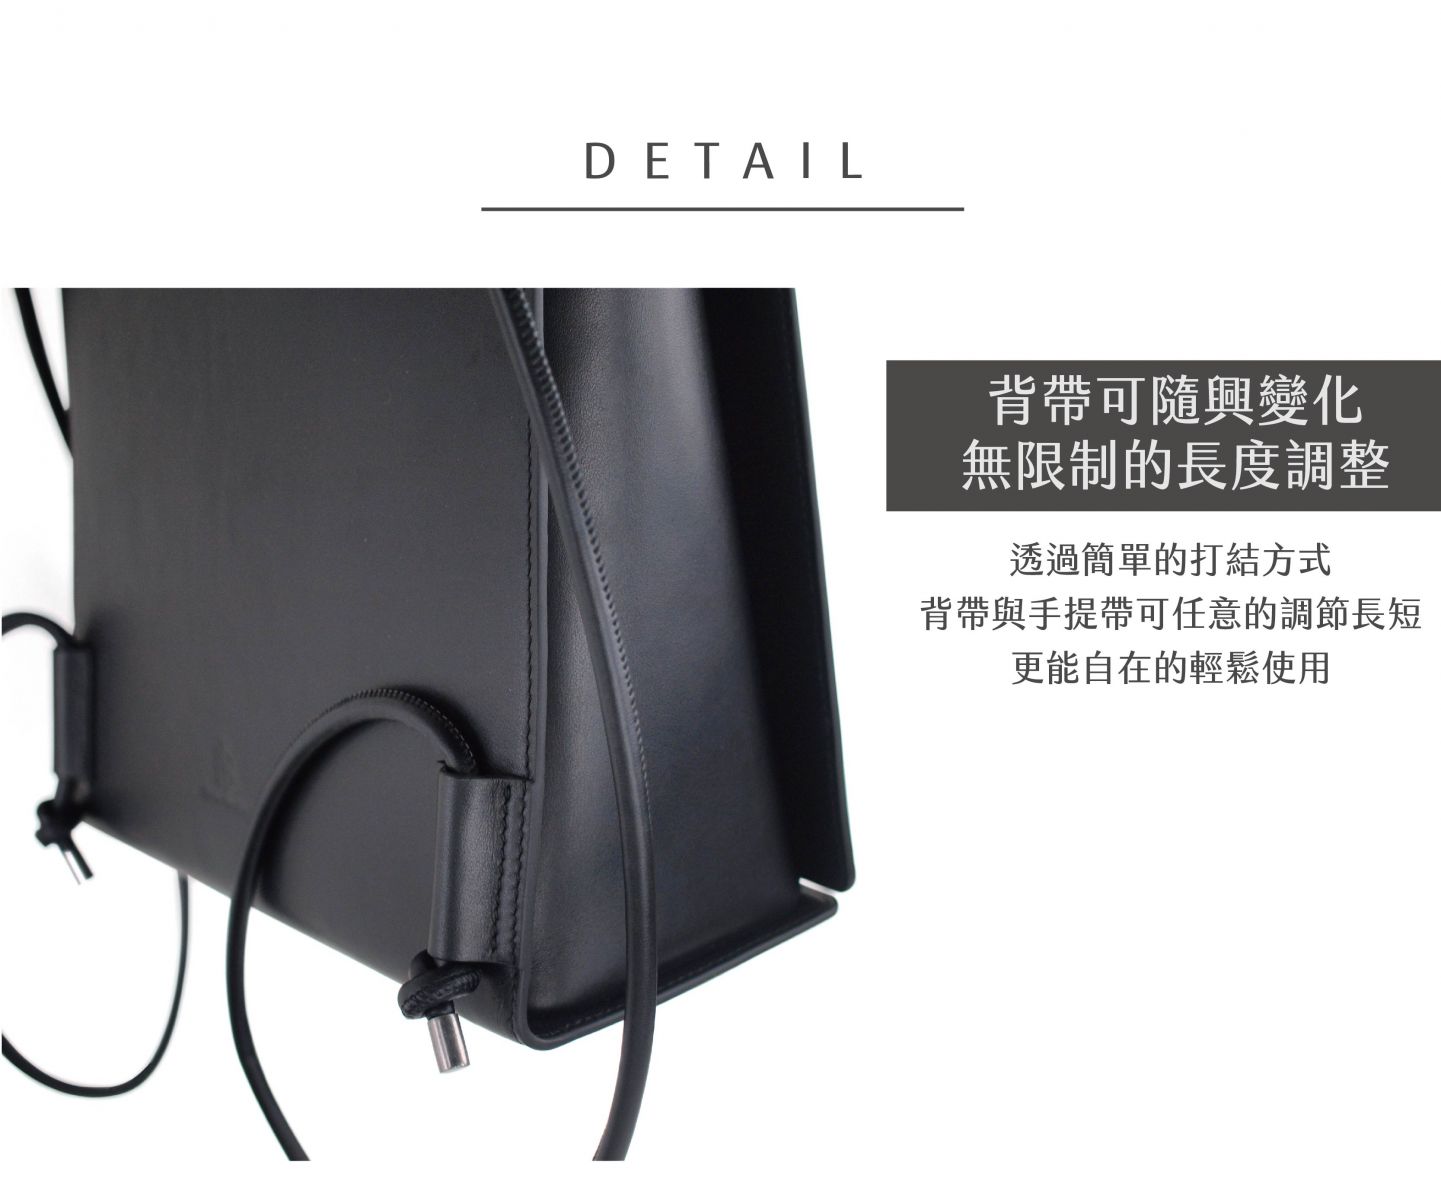 Dictionary Backpack 字典後背包